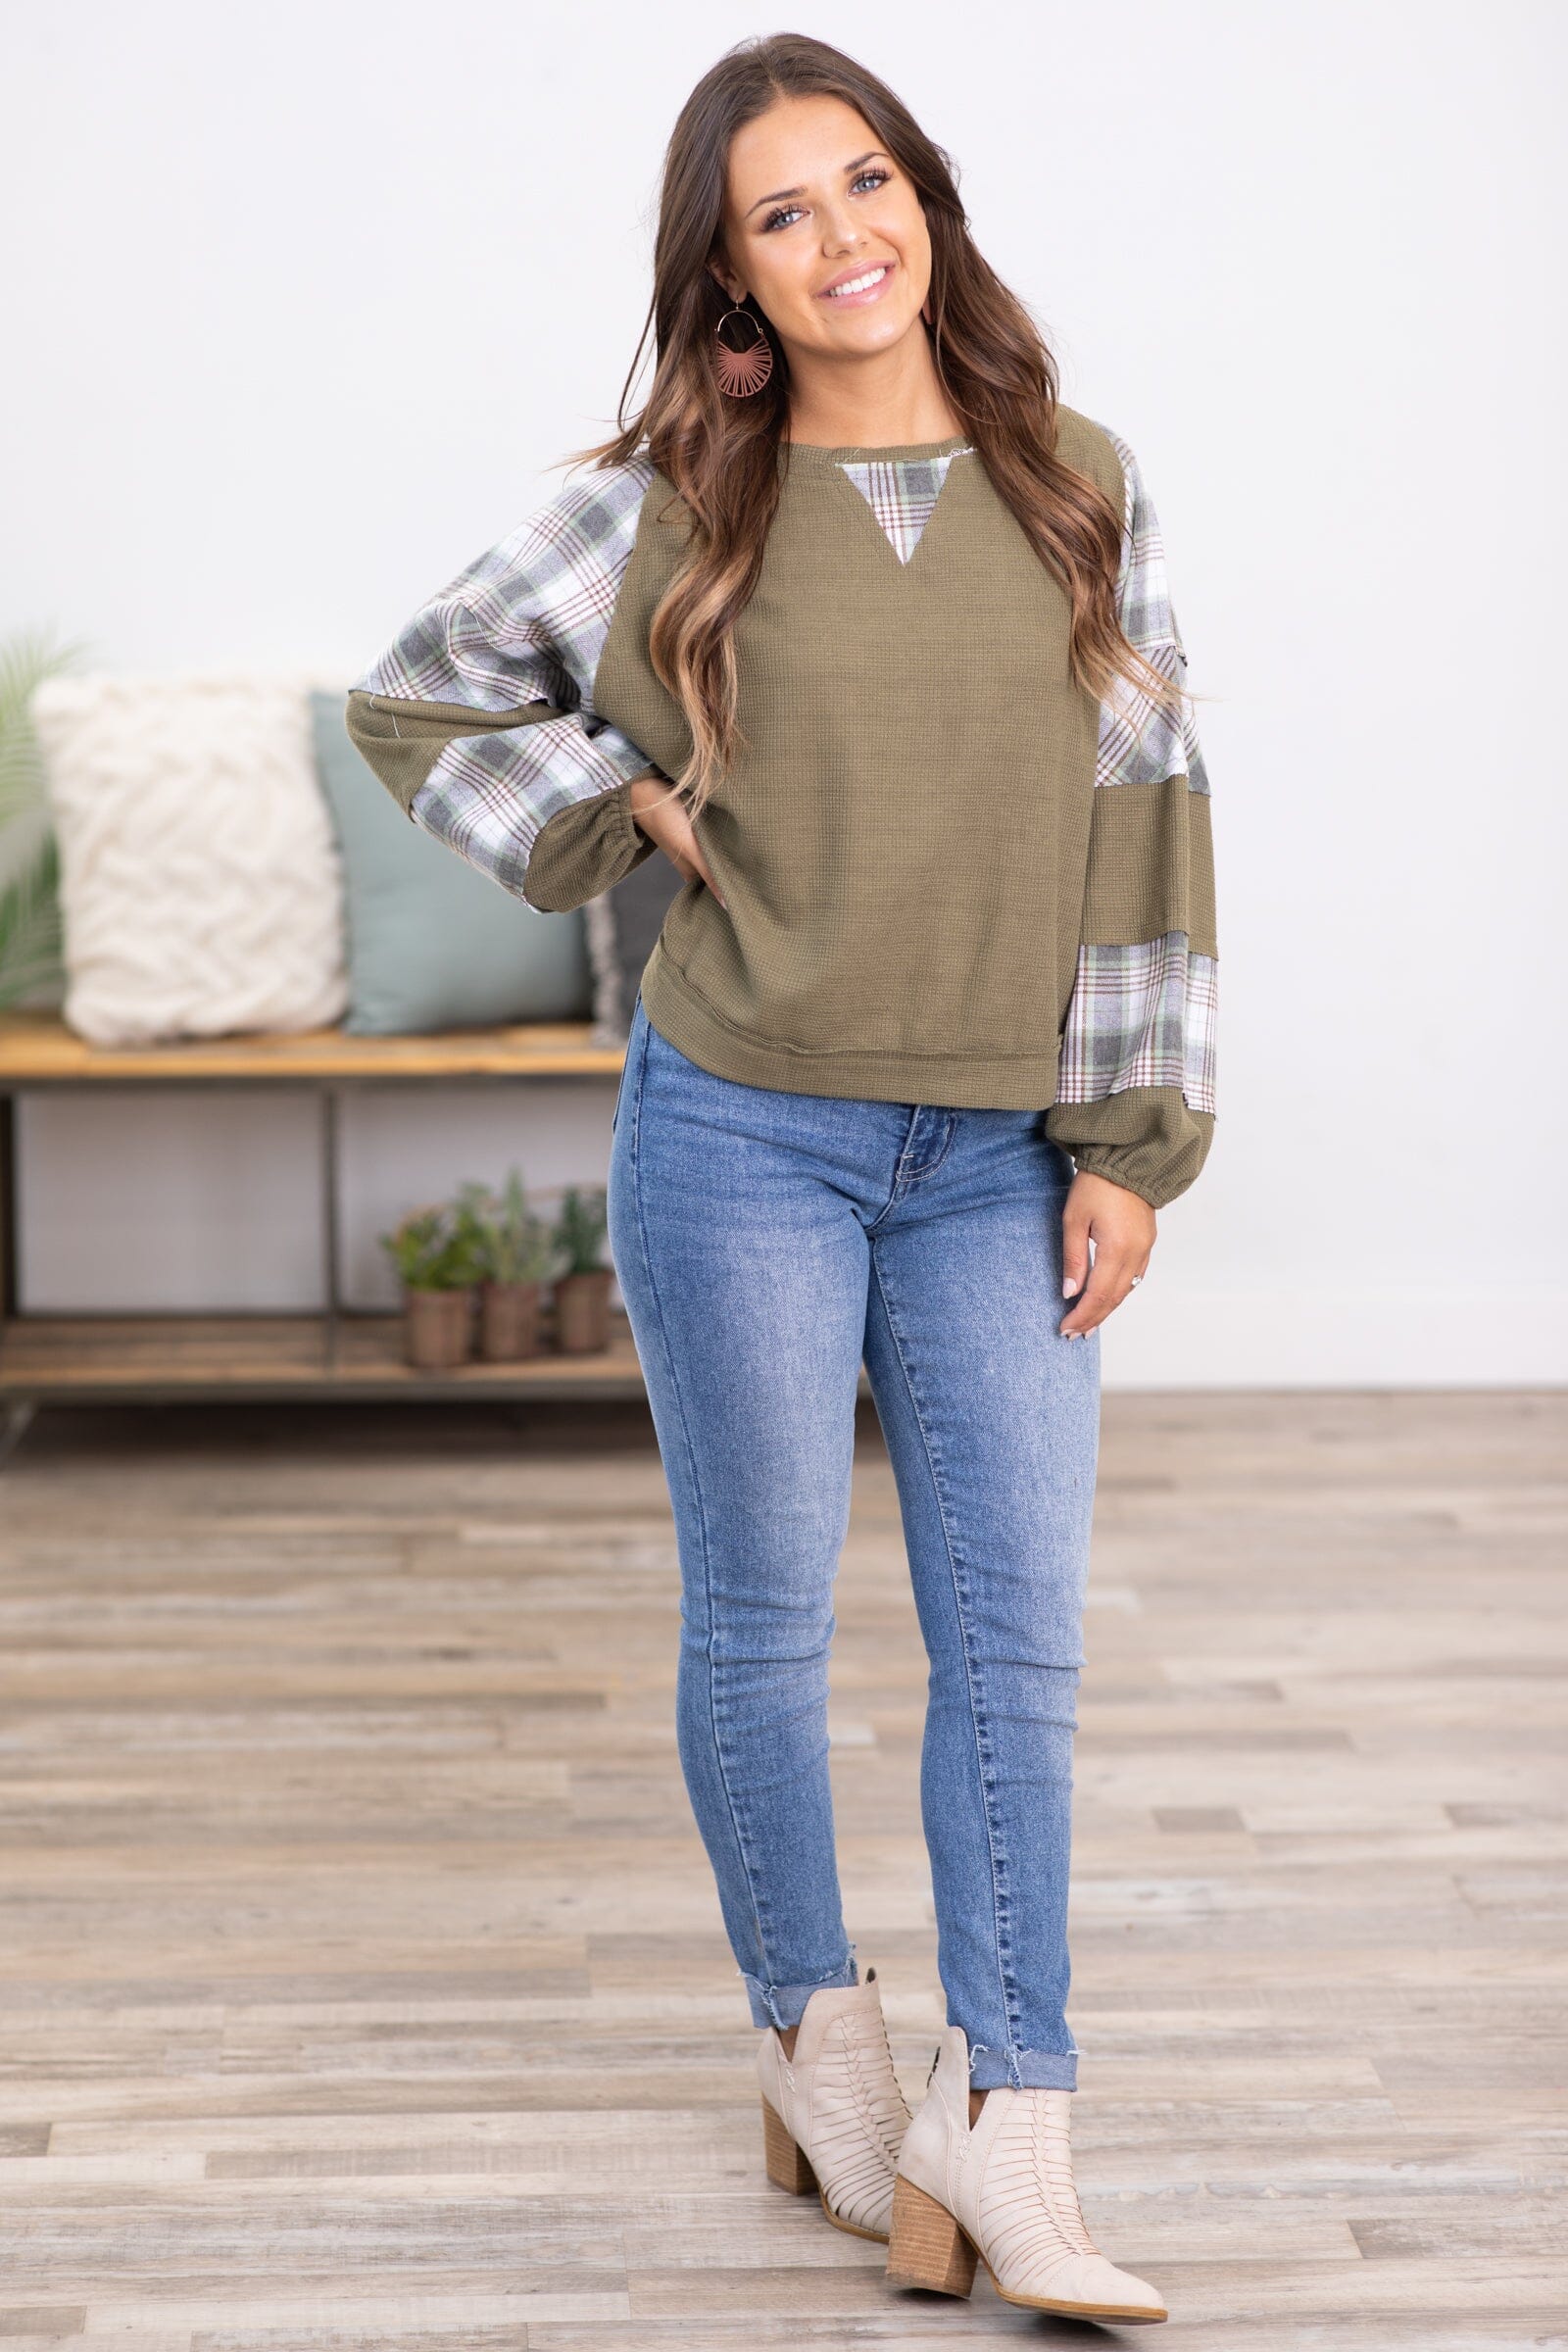 Olive Top With Plaid Sleeve Detail - Filly Flair